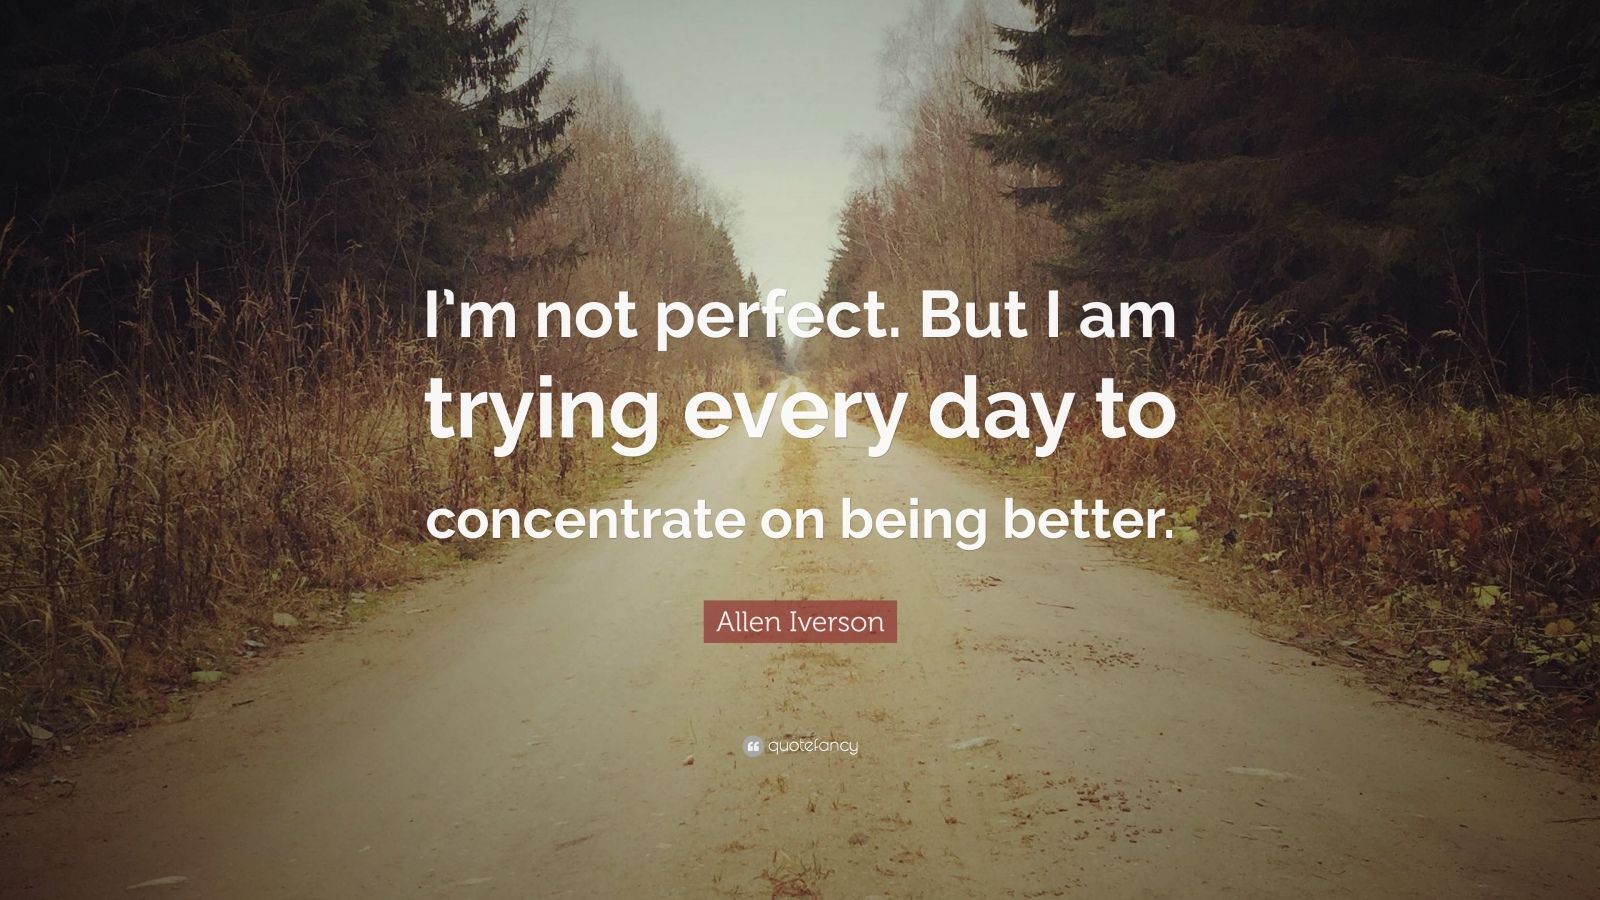 Allen Iverson Quote: "I'm not perfect. But I am trying ...